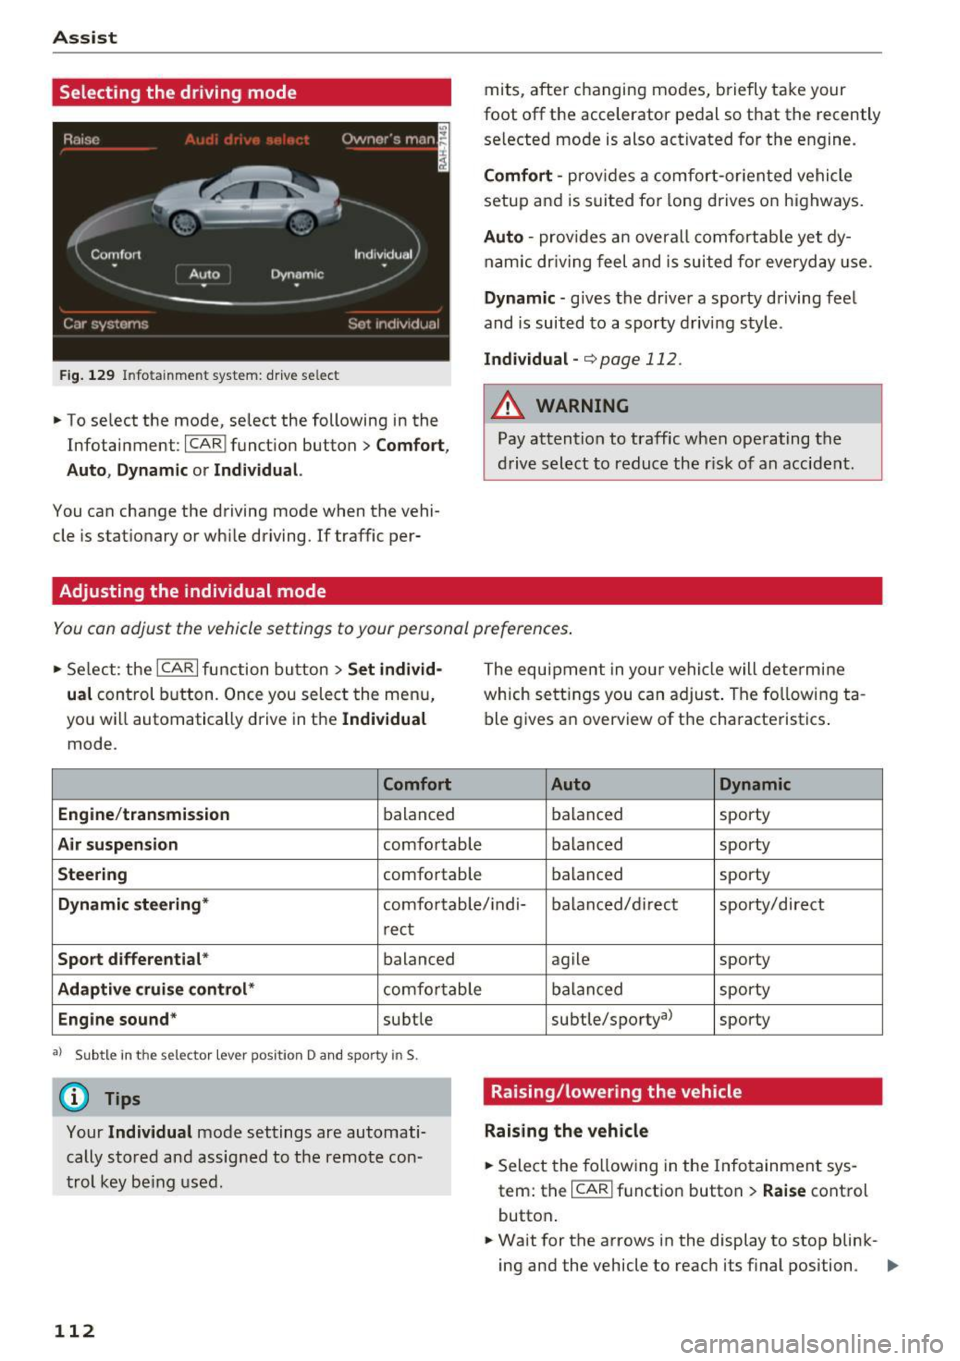 AUDI A8 2017  Owners Manual Ass is t 
Selecting  the  driving  mode 
Fig . 129 In fotainme nt  system:  drive se lect 
•  To se lect  the  mode,  select  the  following  in the 
Infotainment : 
ICARI function  button> C omfort